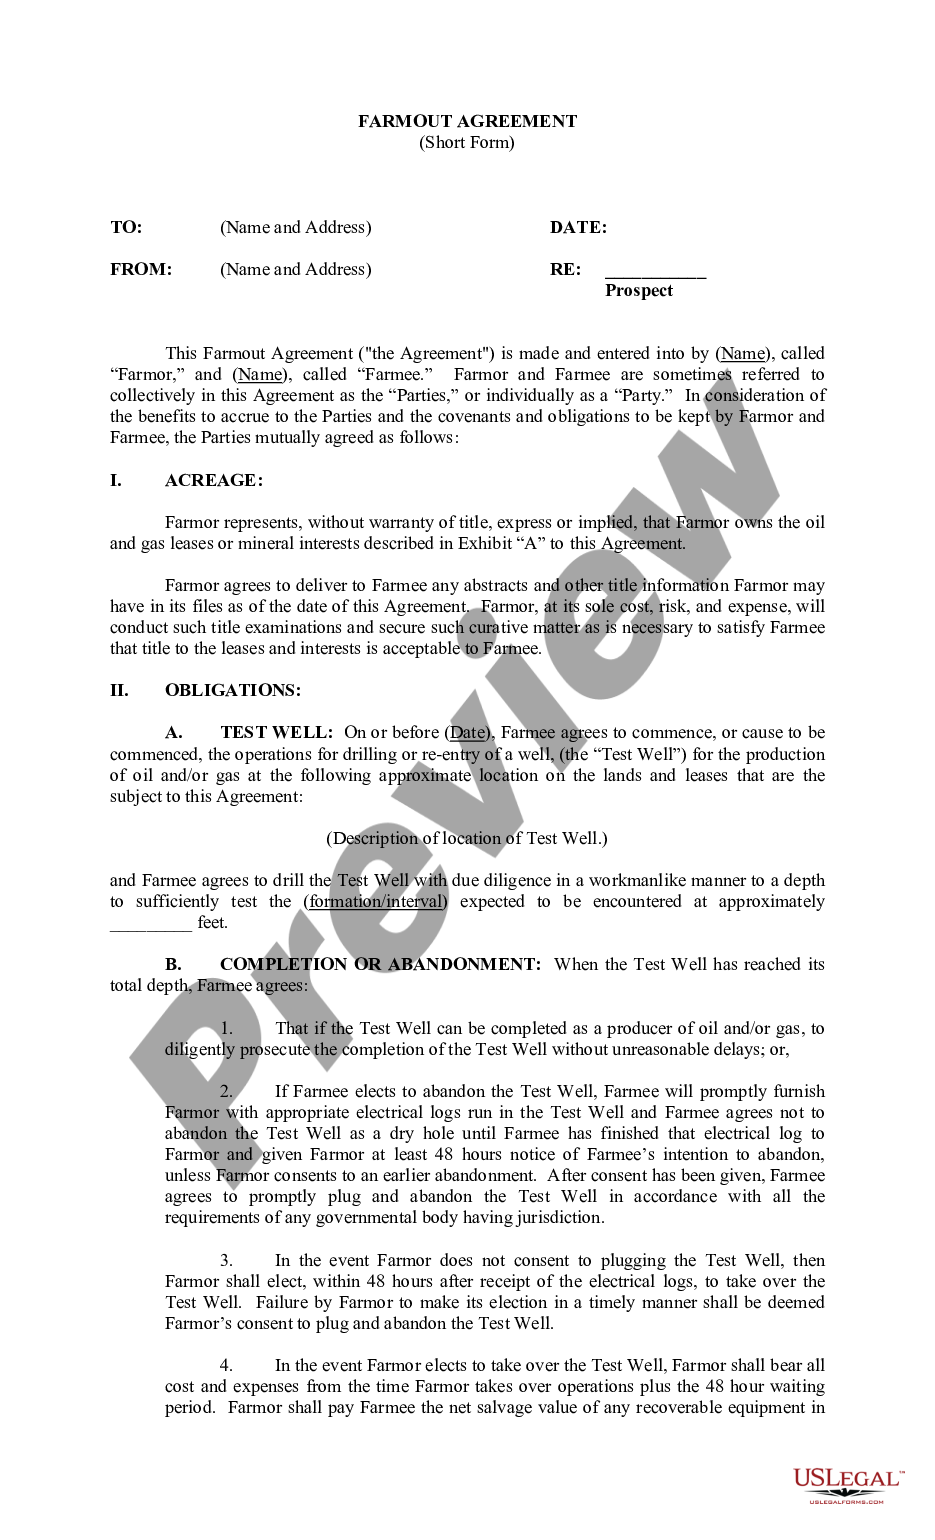 page 0 Farmout Agreement - Short Form preview